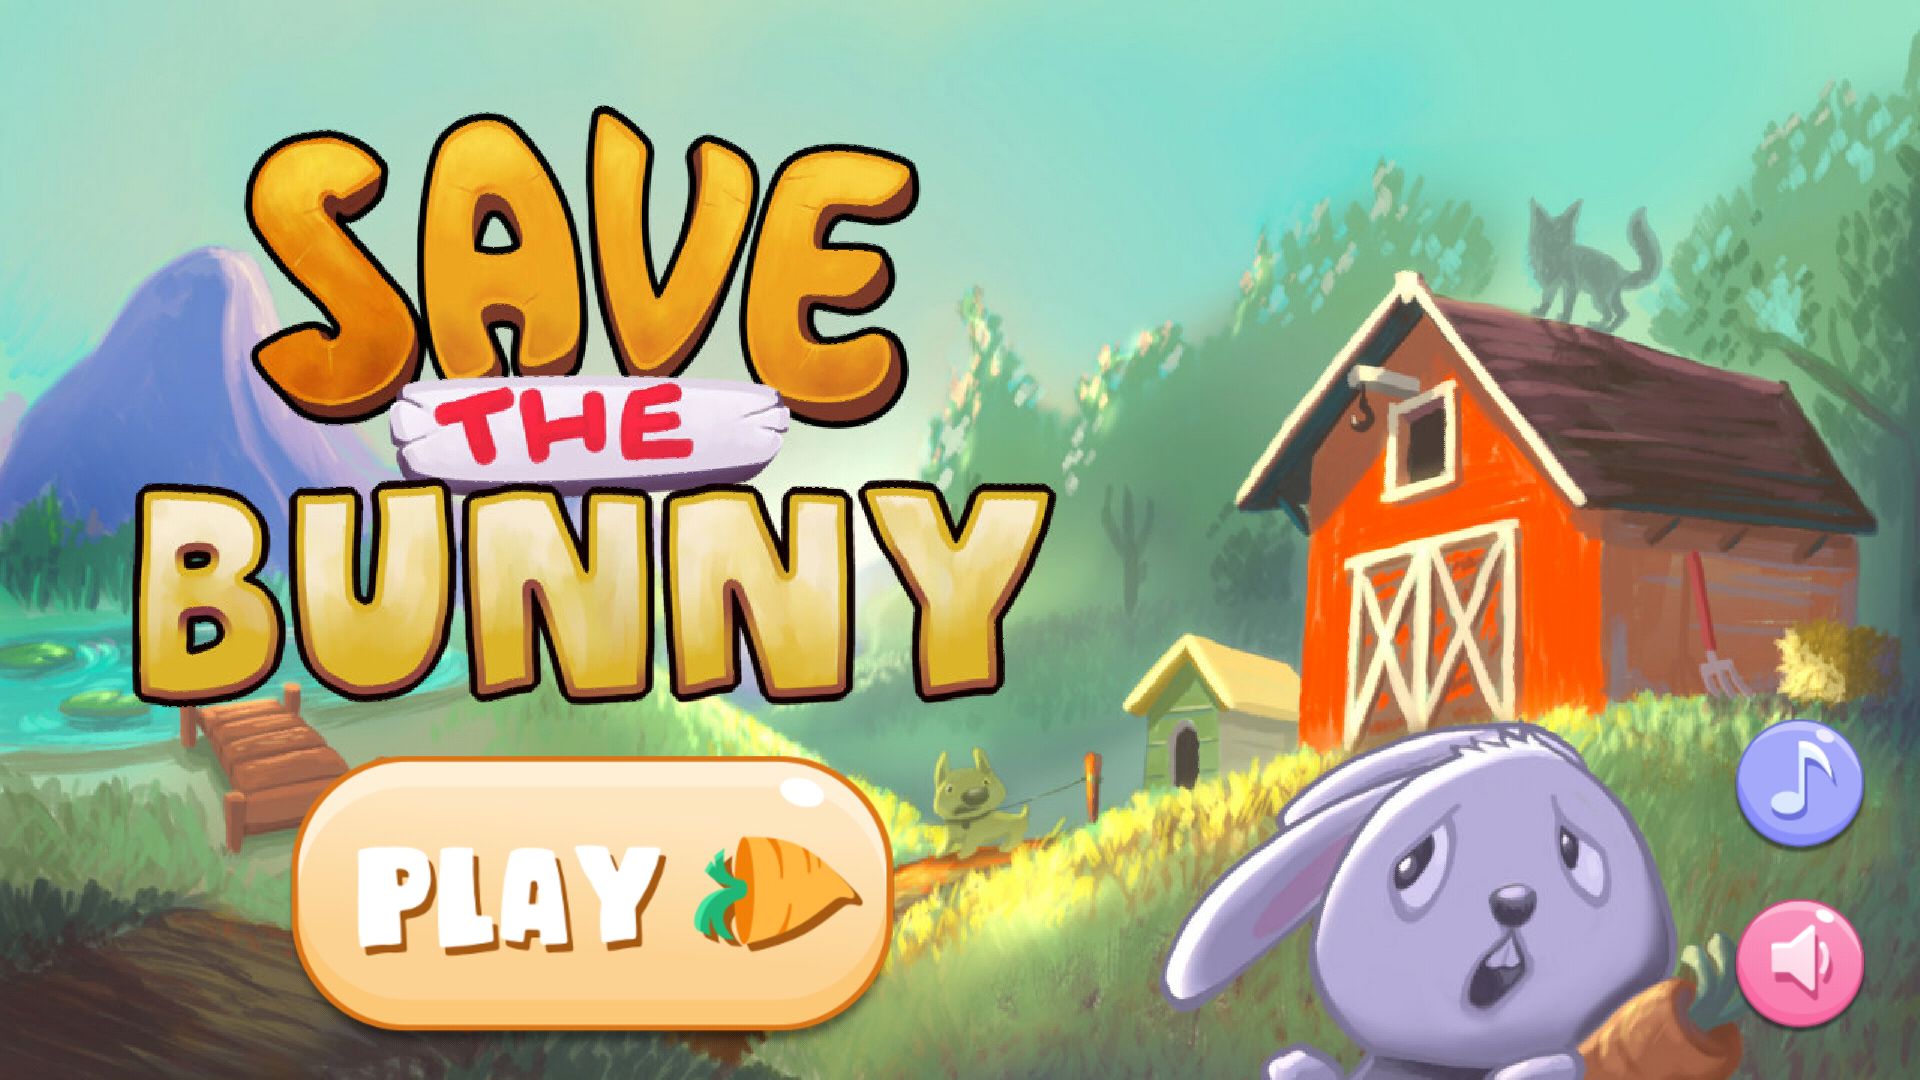 Save the bunny!